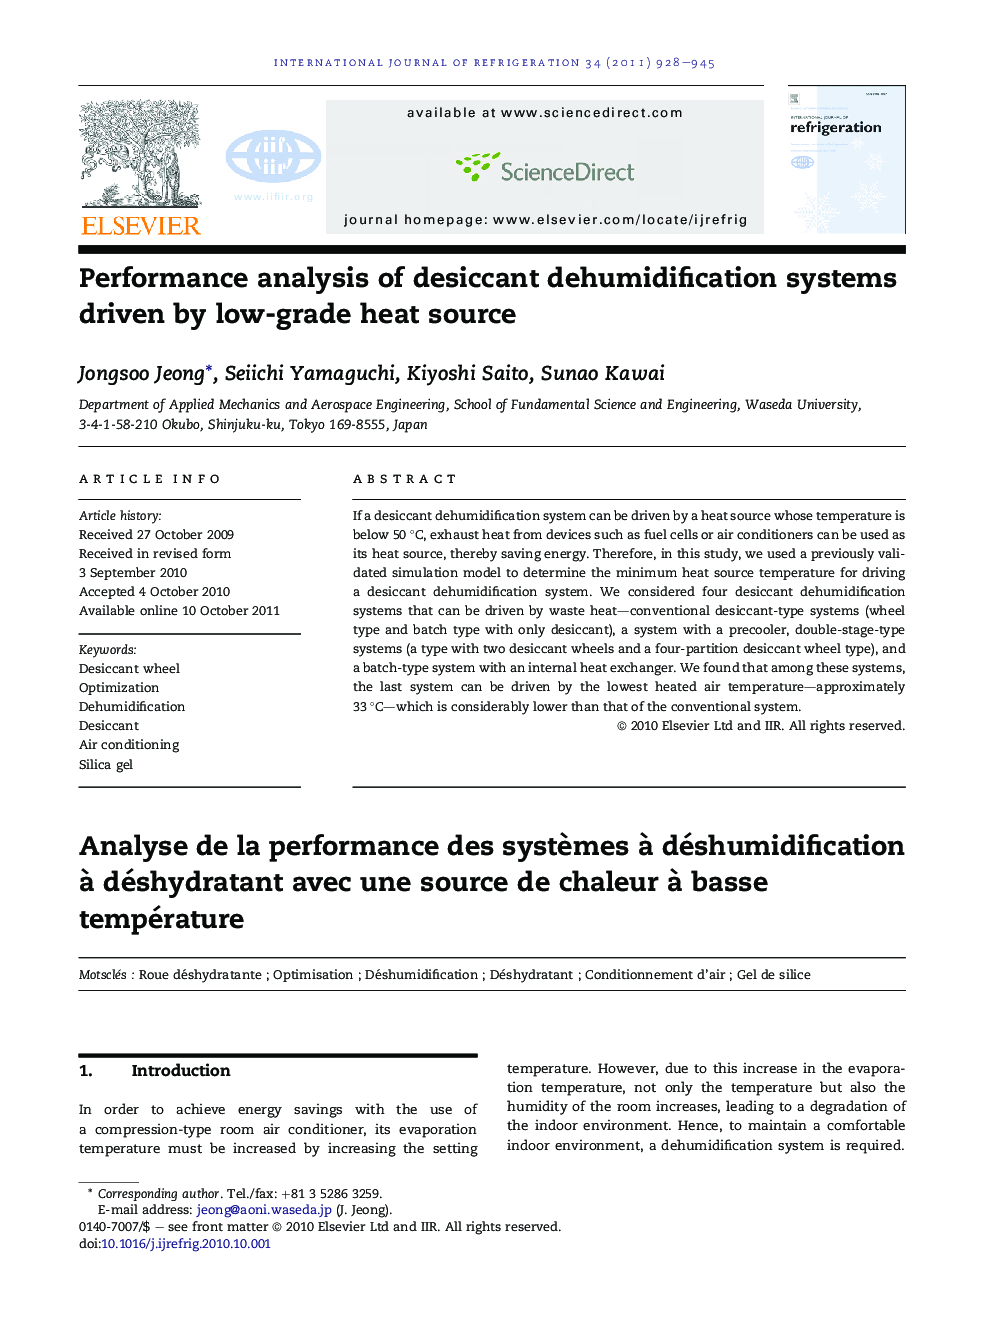 Performance analysis of desiccant dehumidification systems driven by low-grade heat source